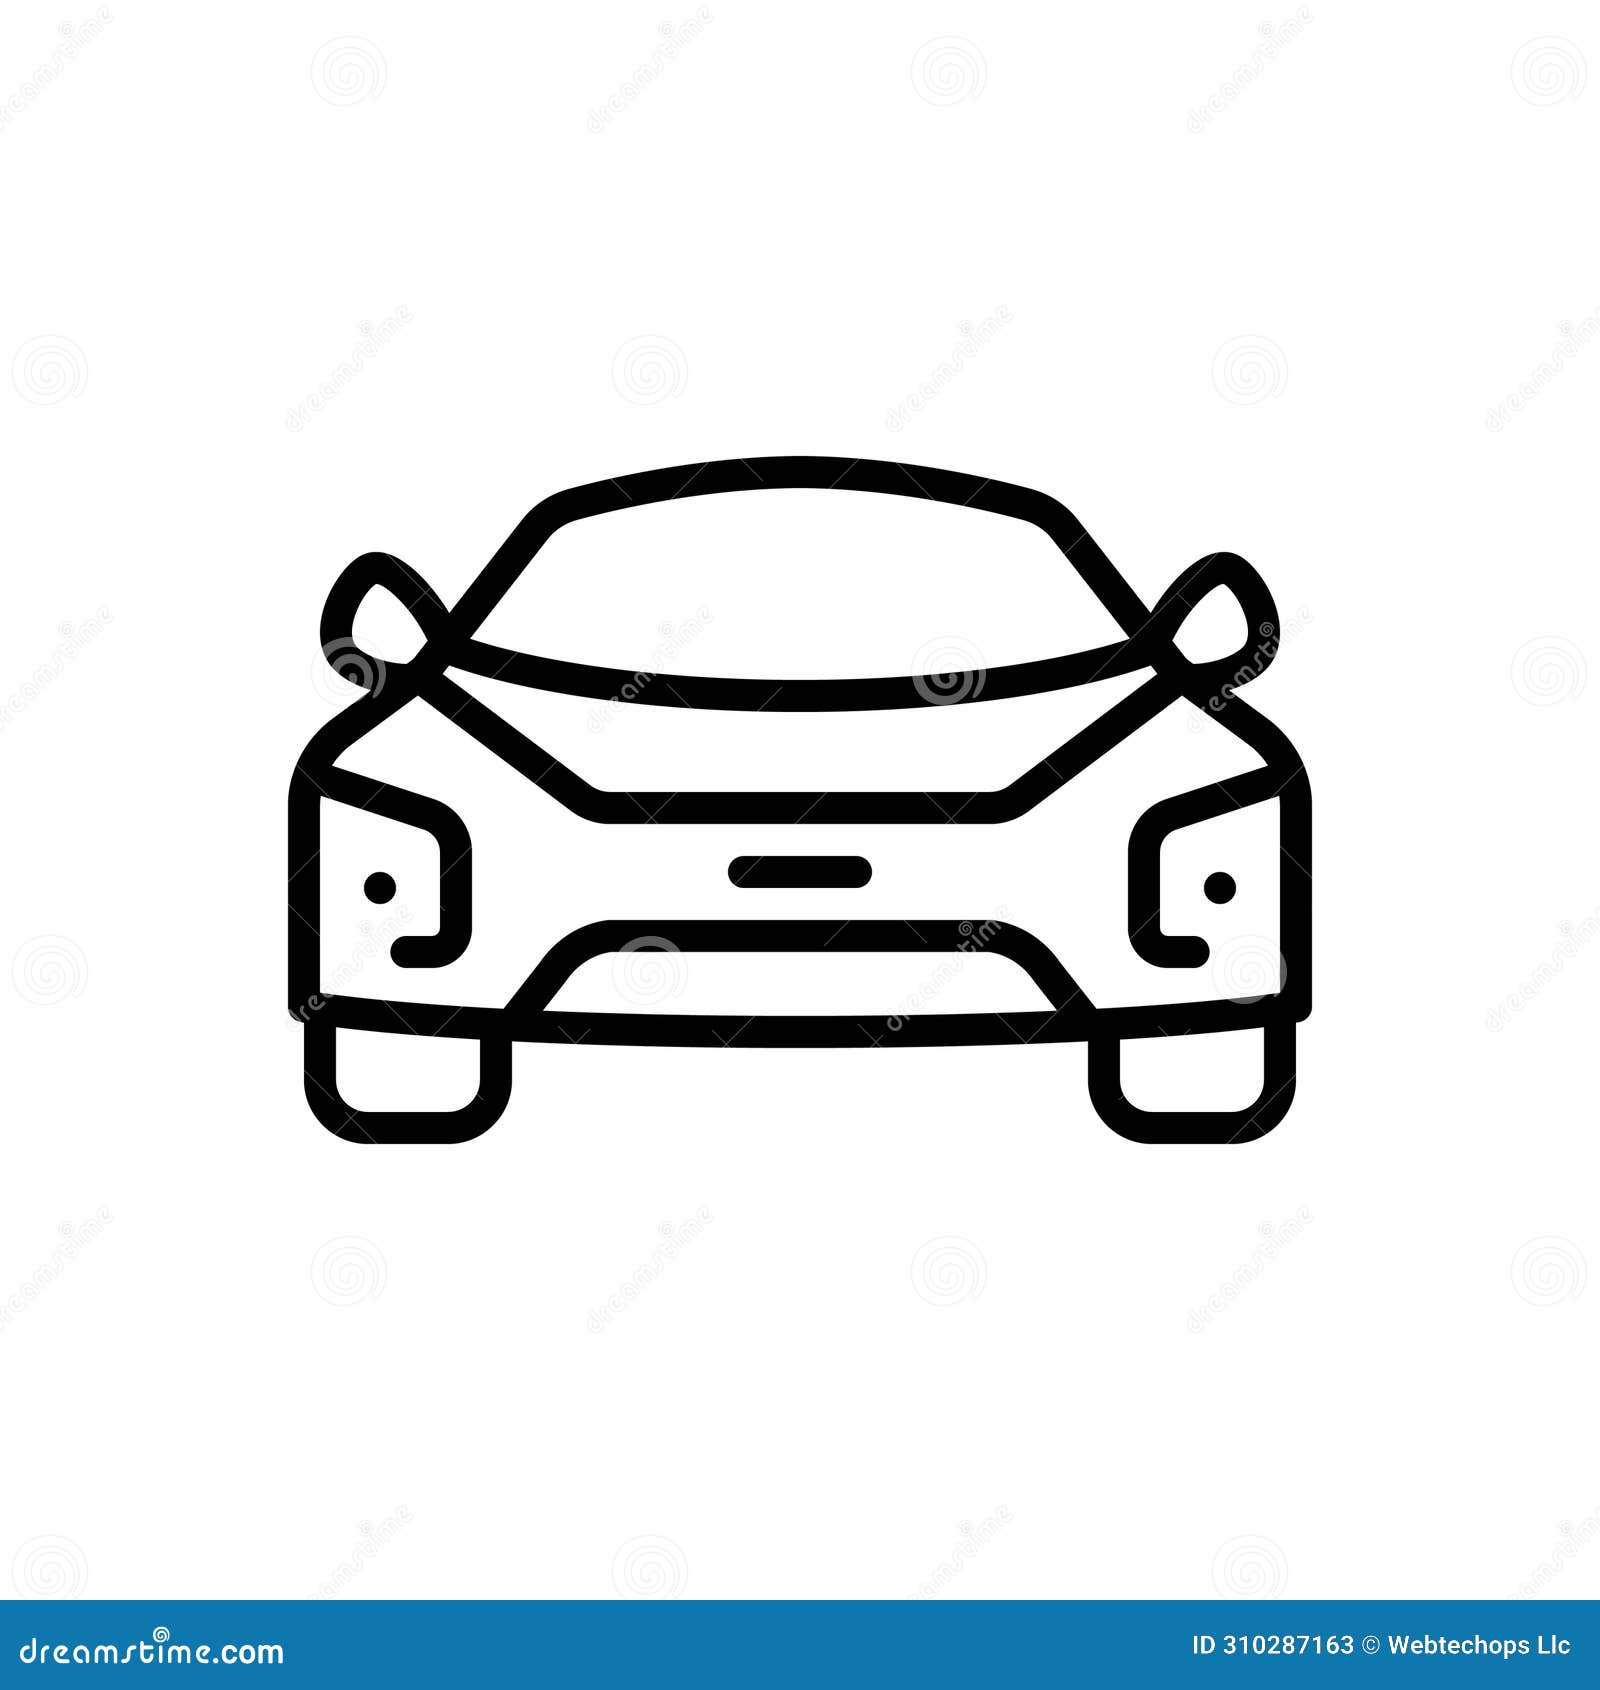 black line icon for car, conveyance and transport